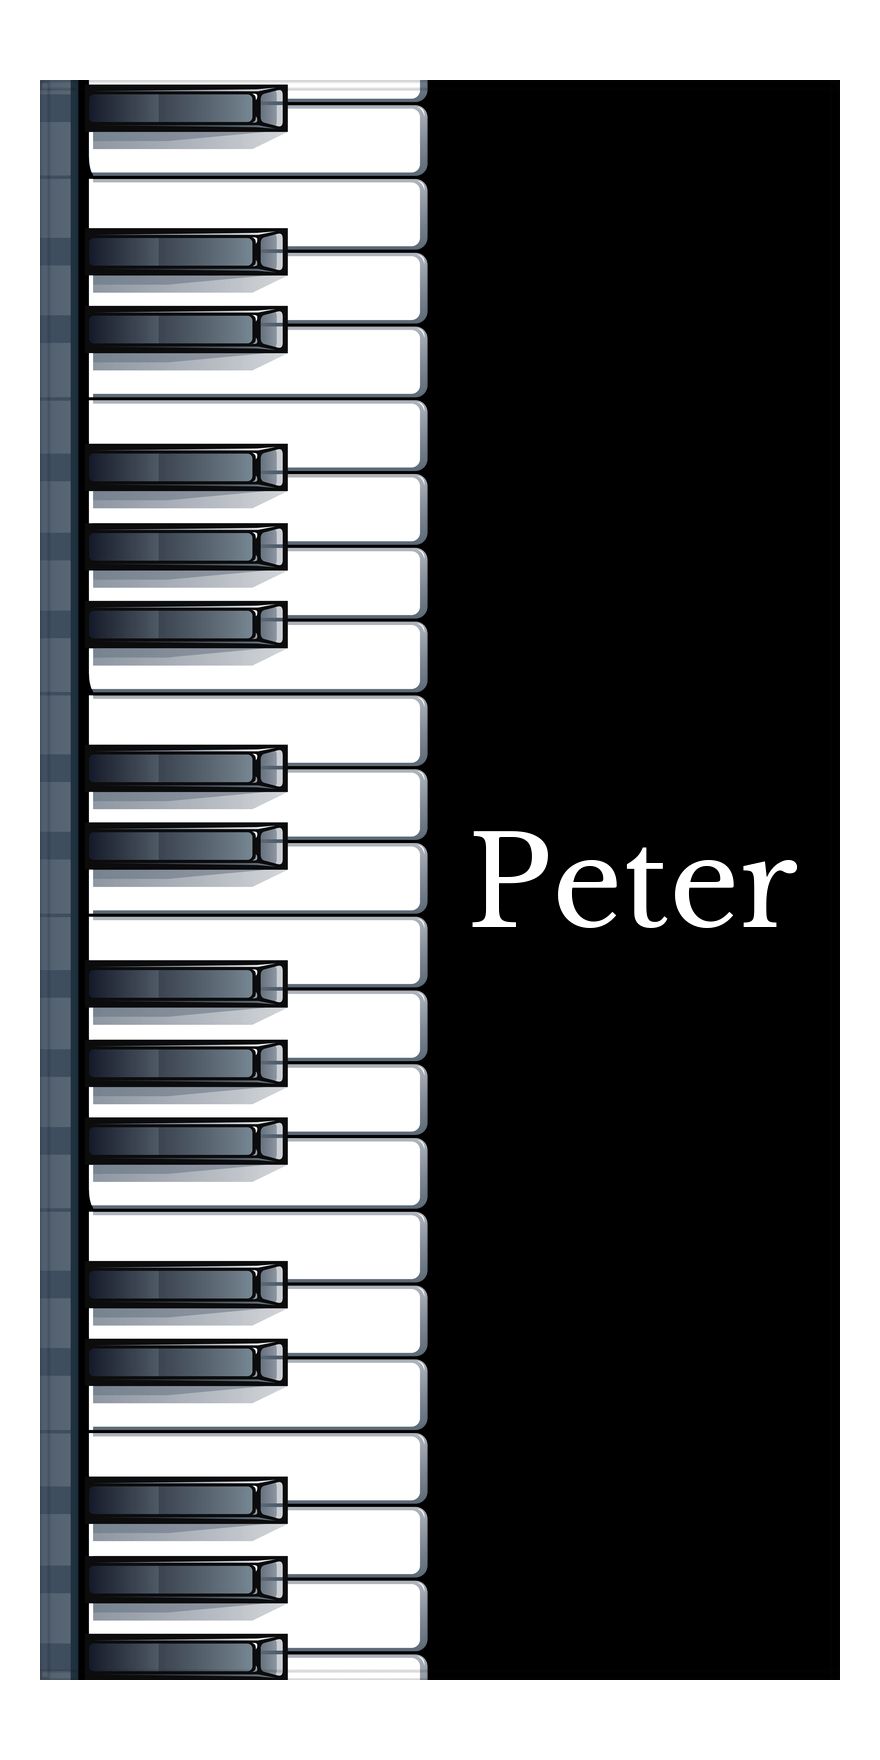 Personalized Piano Keys Beach Towel - Black Background - Vertical with Right Text - Front View